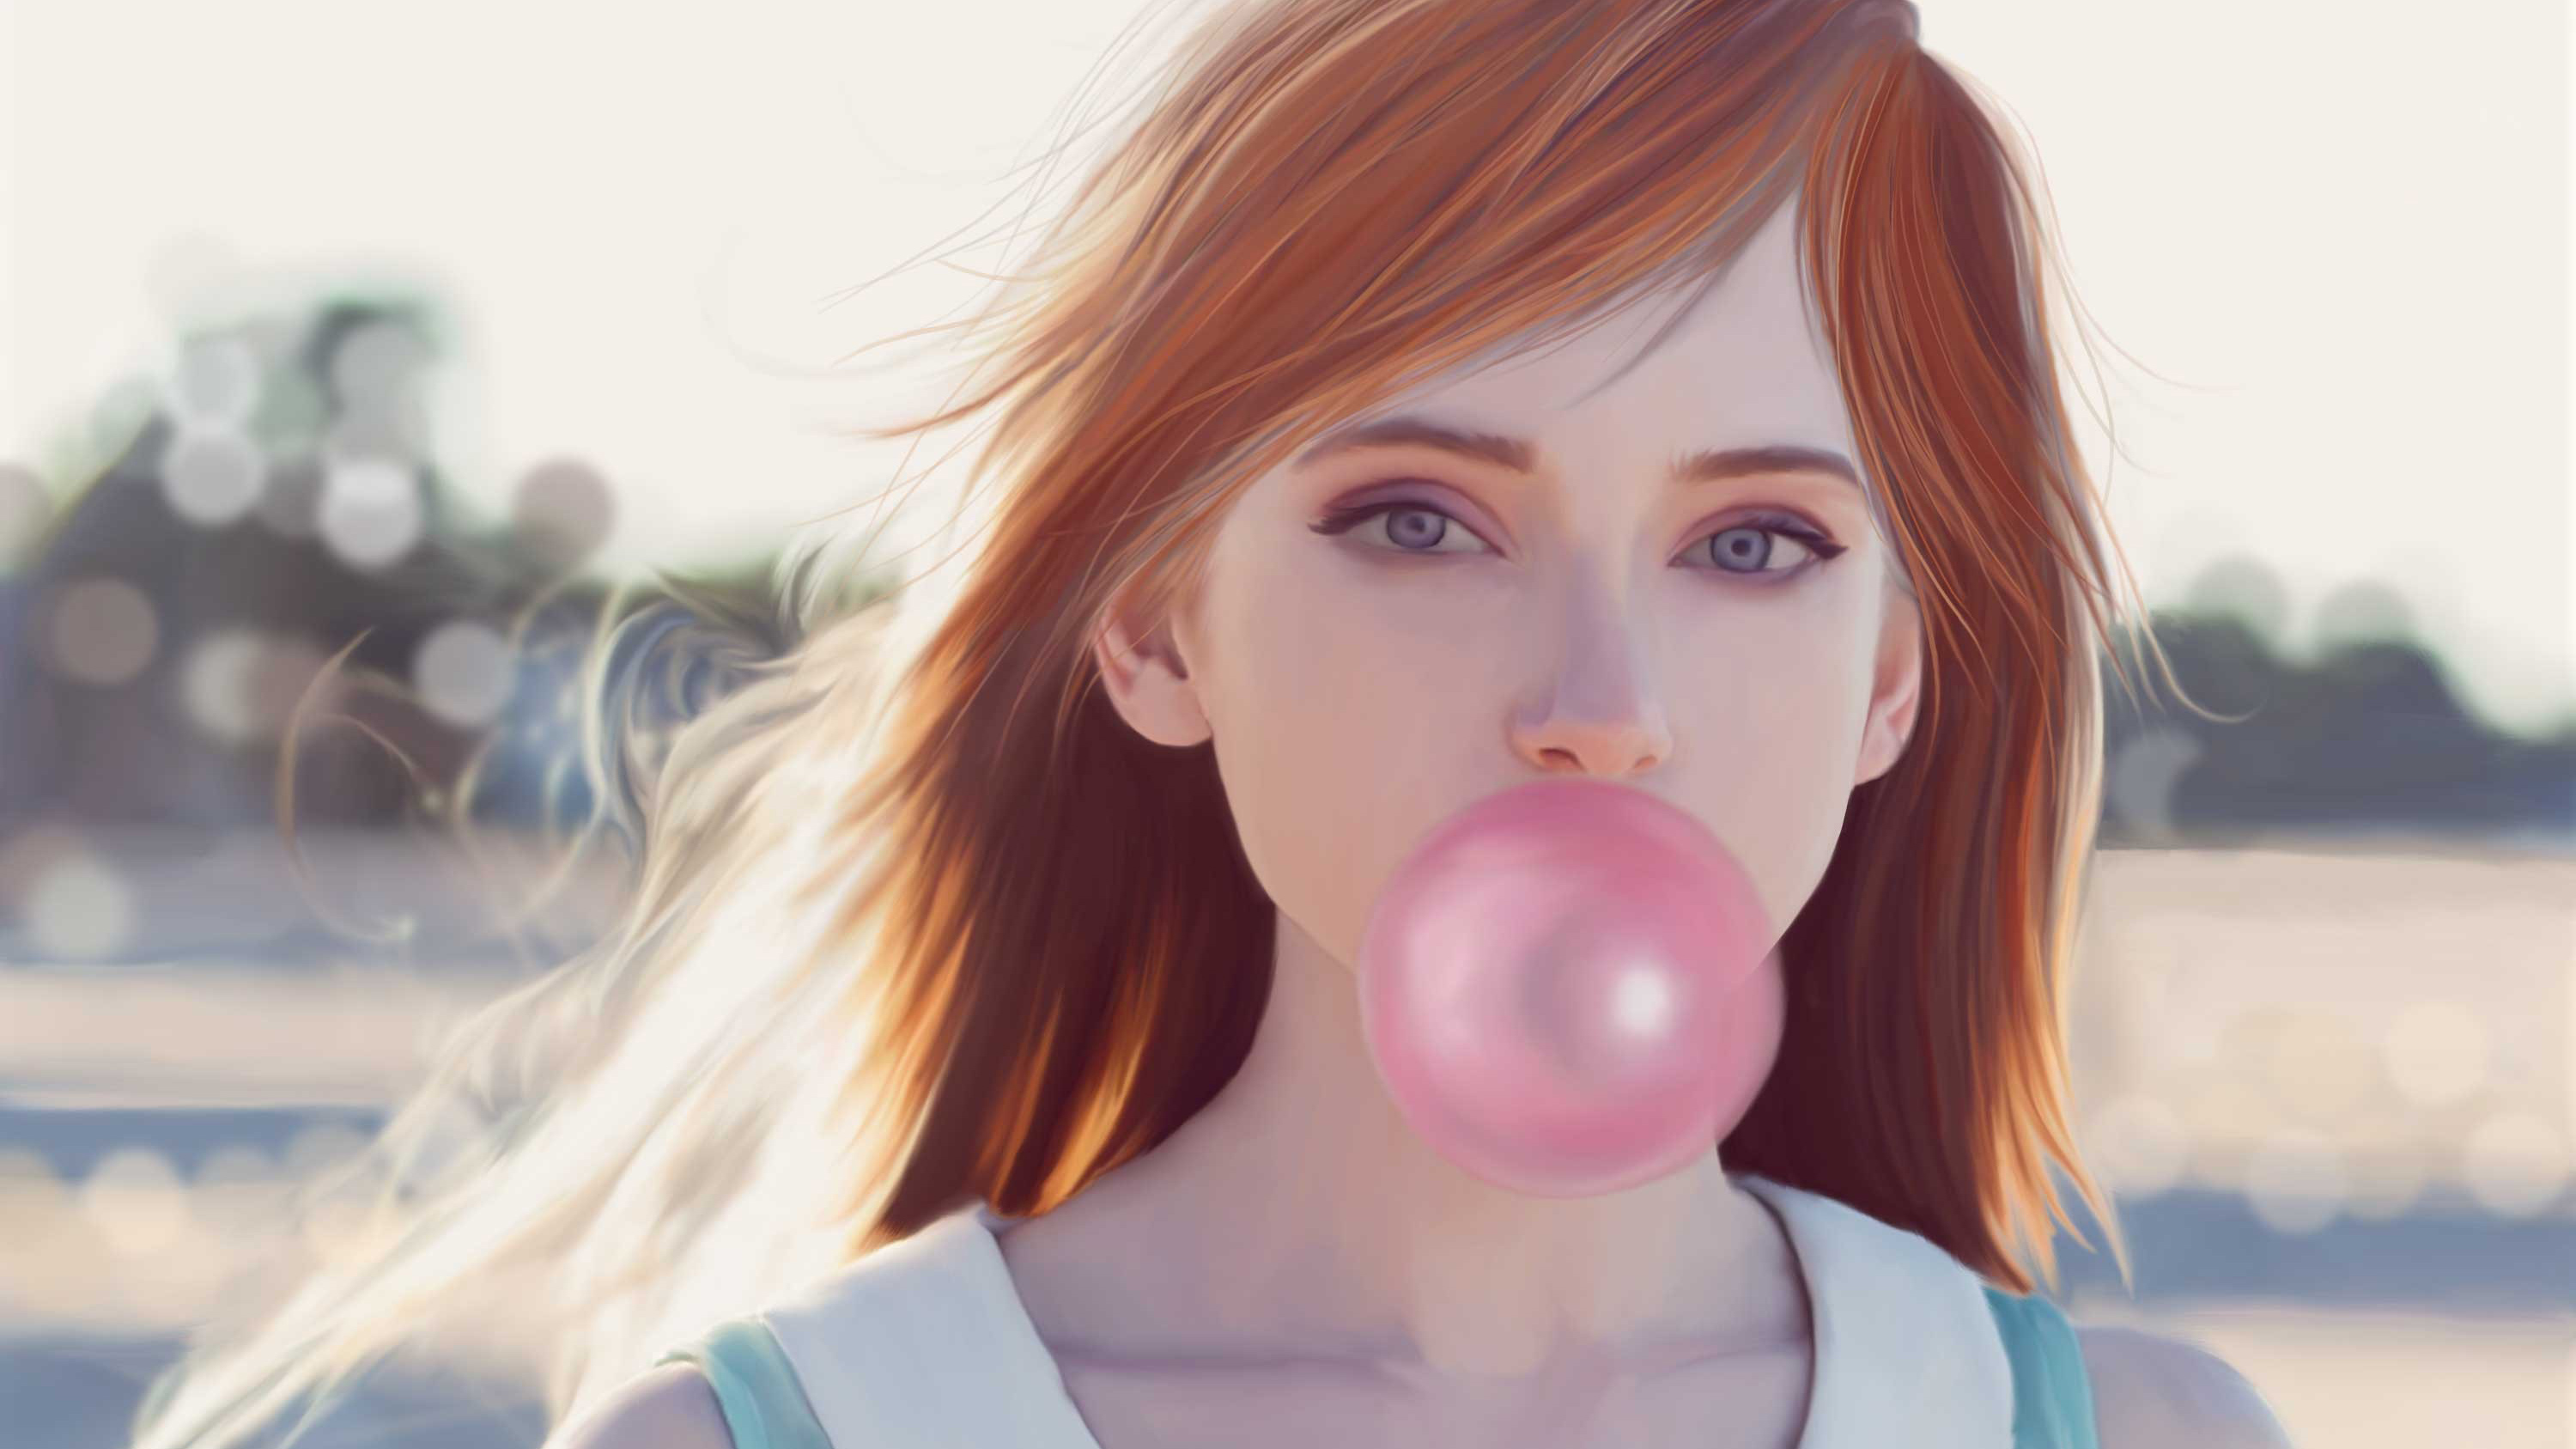 Girl Blowing Bubble Gum Hd Fantasy Girls 4k Wallpapers Images Backgrounds Photos And Pictures